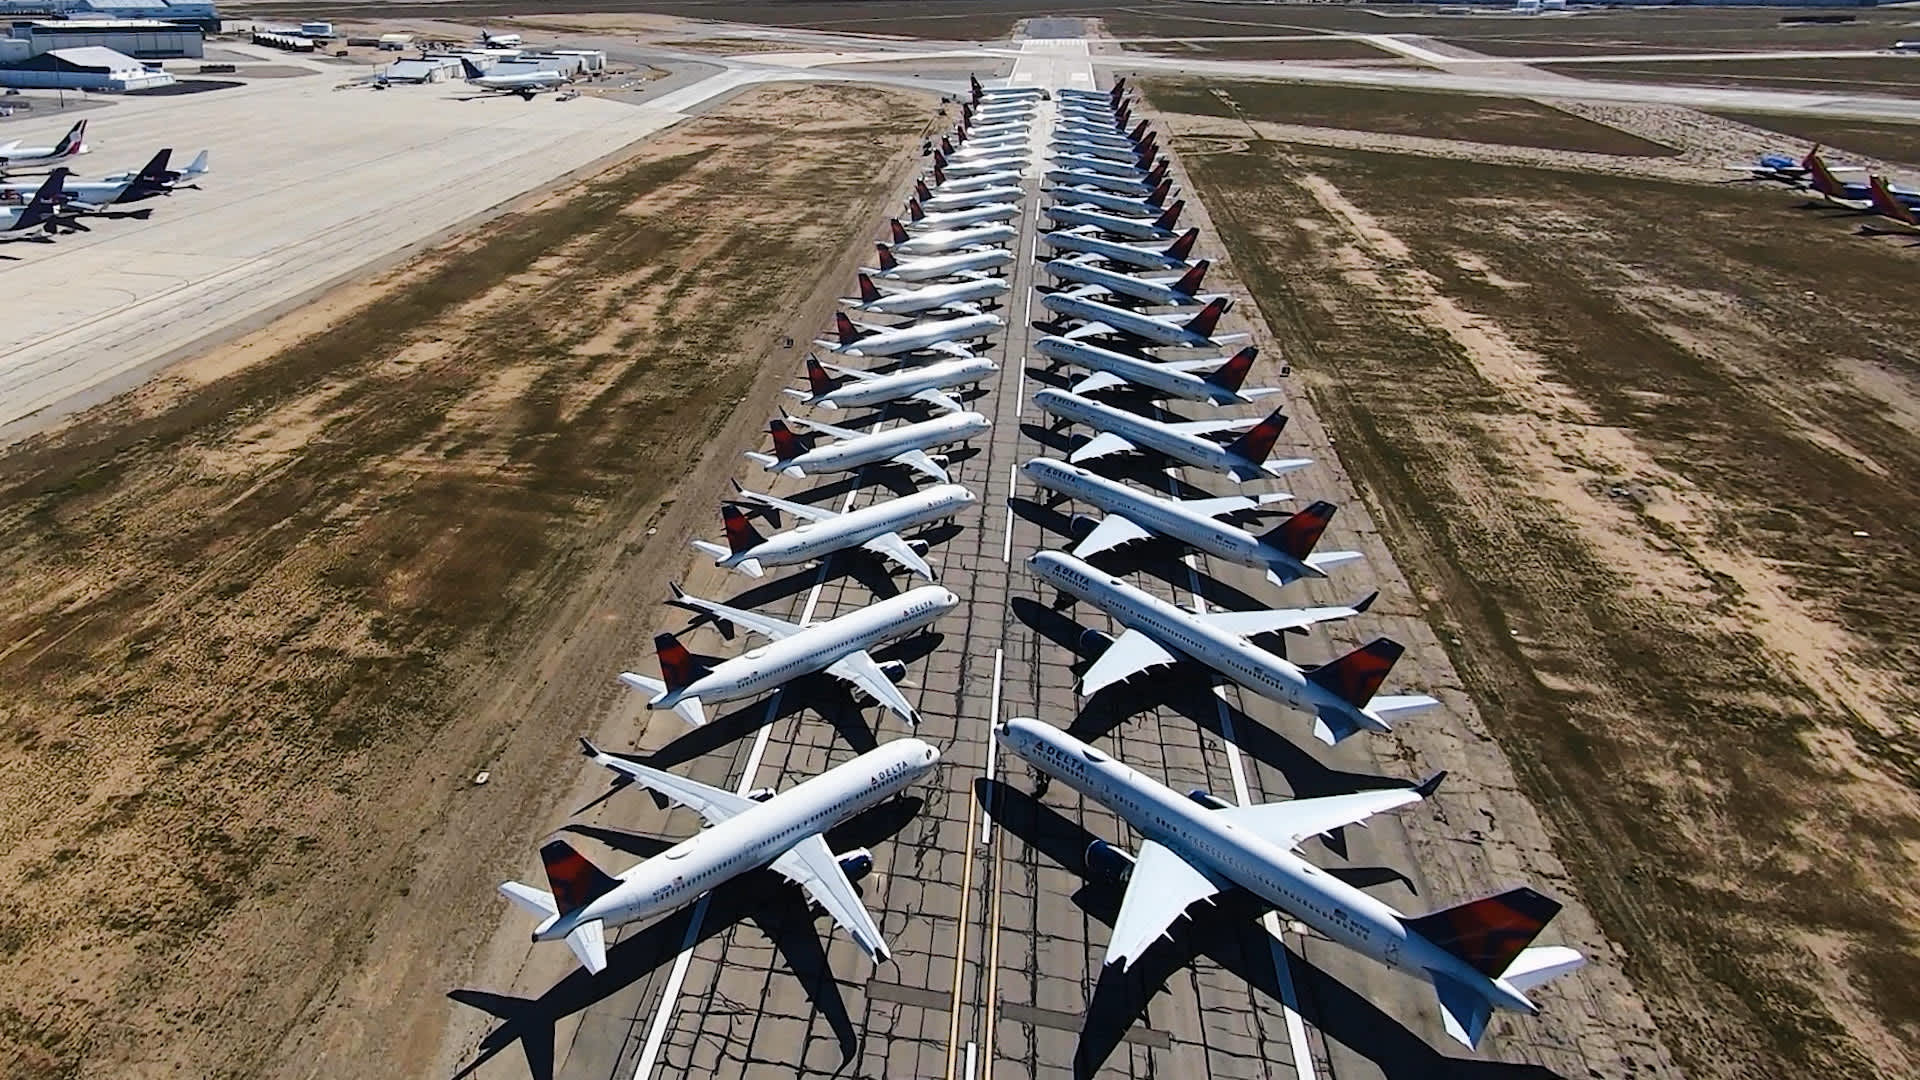 How Airlines Park Thousands Of Planes